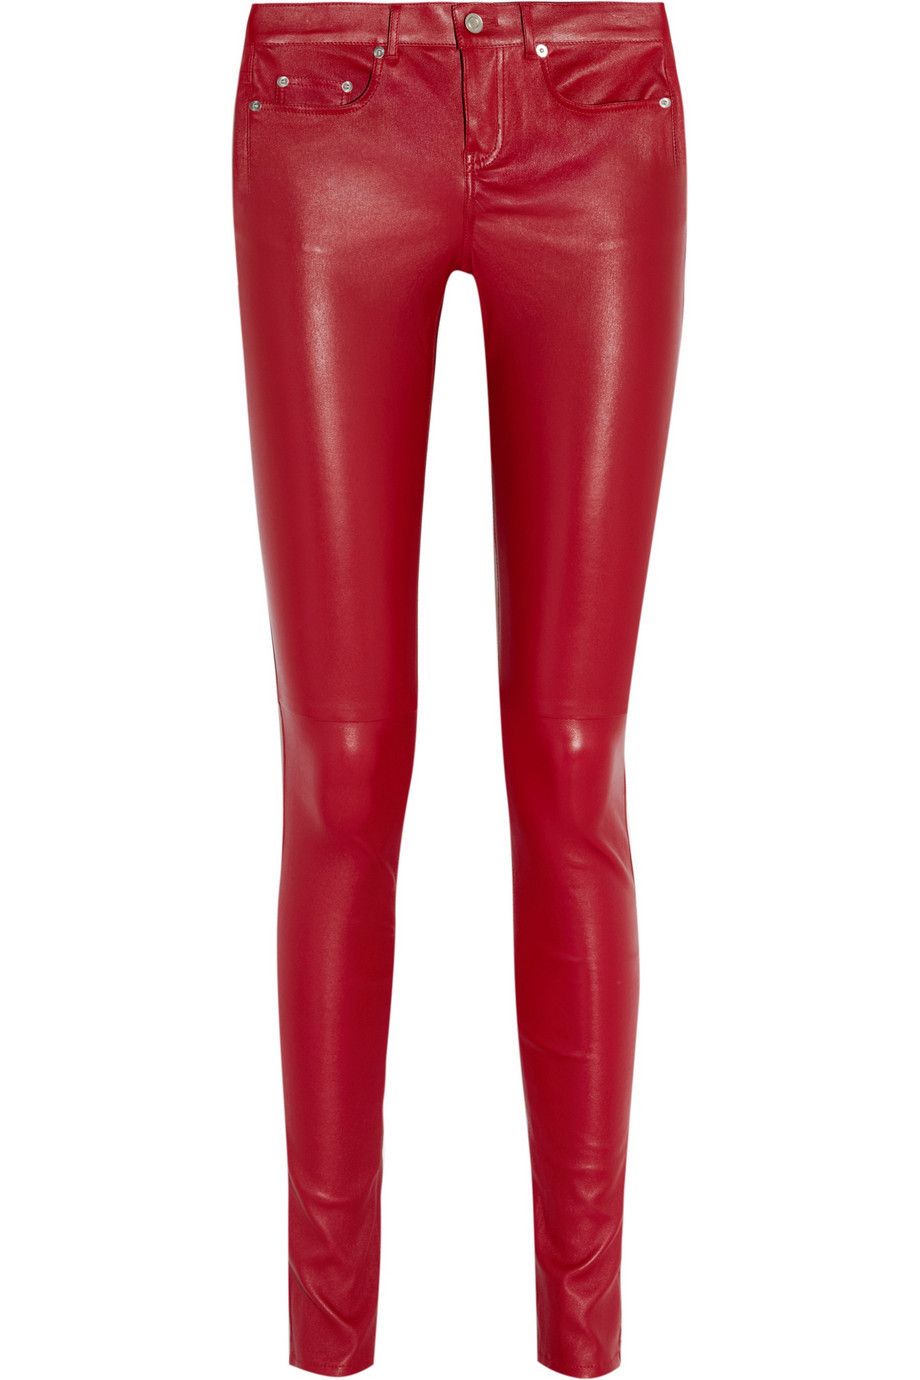 Textile, Red, Pocket, Latex, Carmine, Denim, Thigh, Leather, Material property, Latex clothing, 